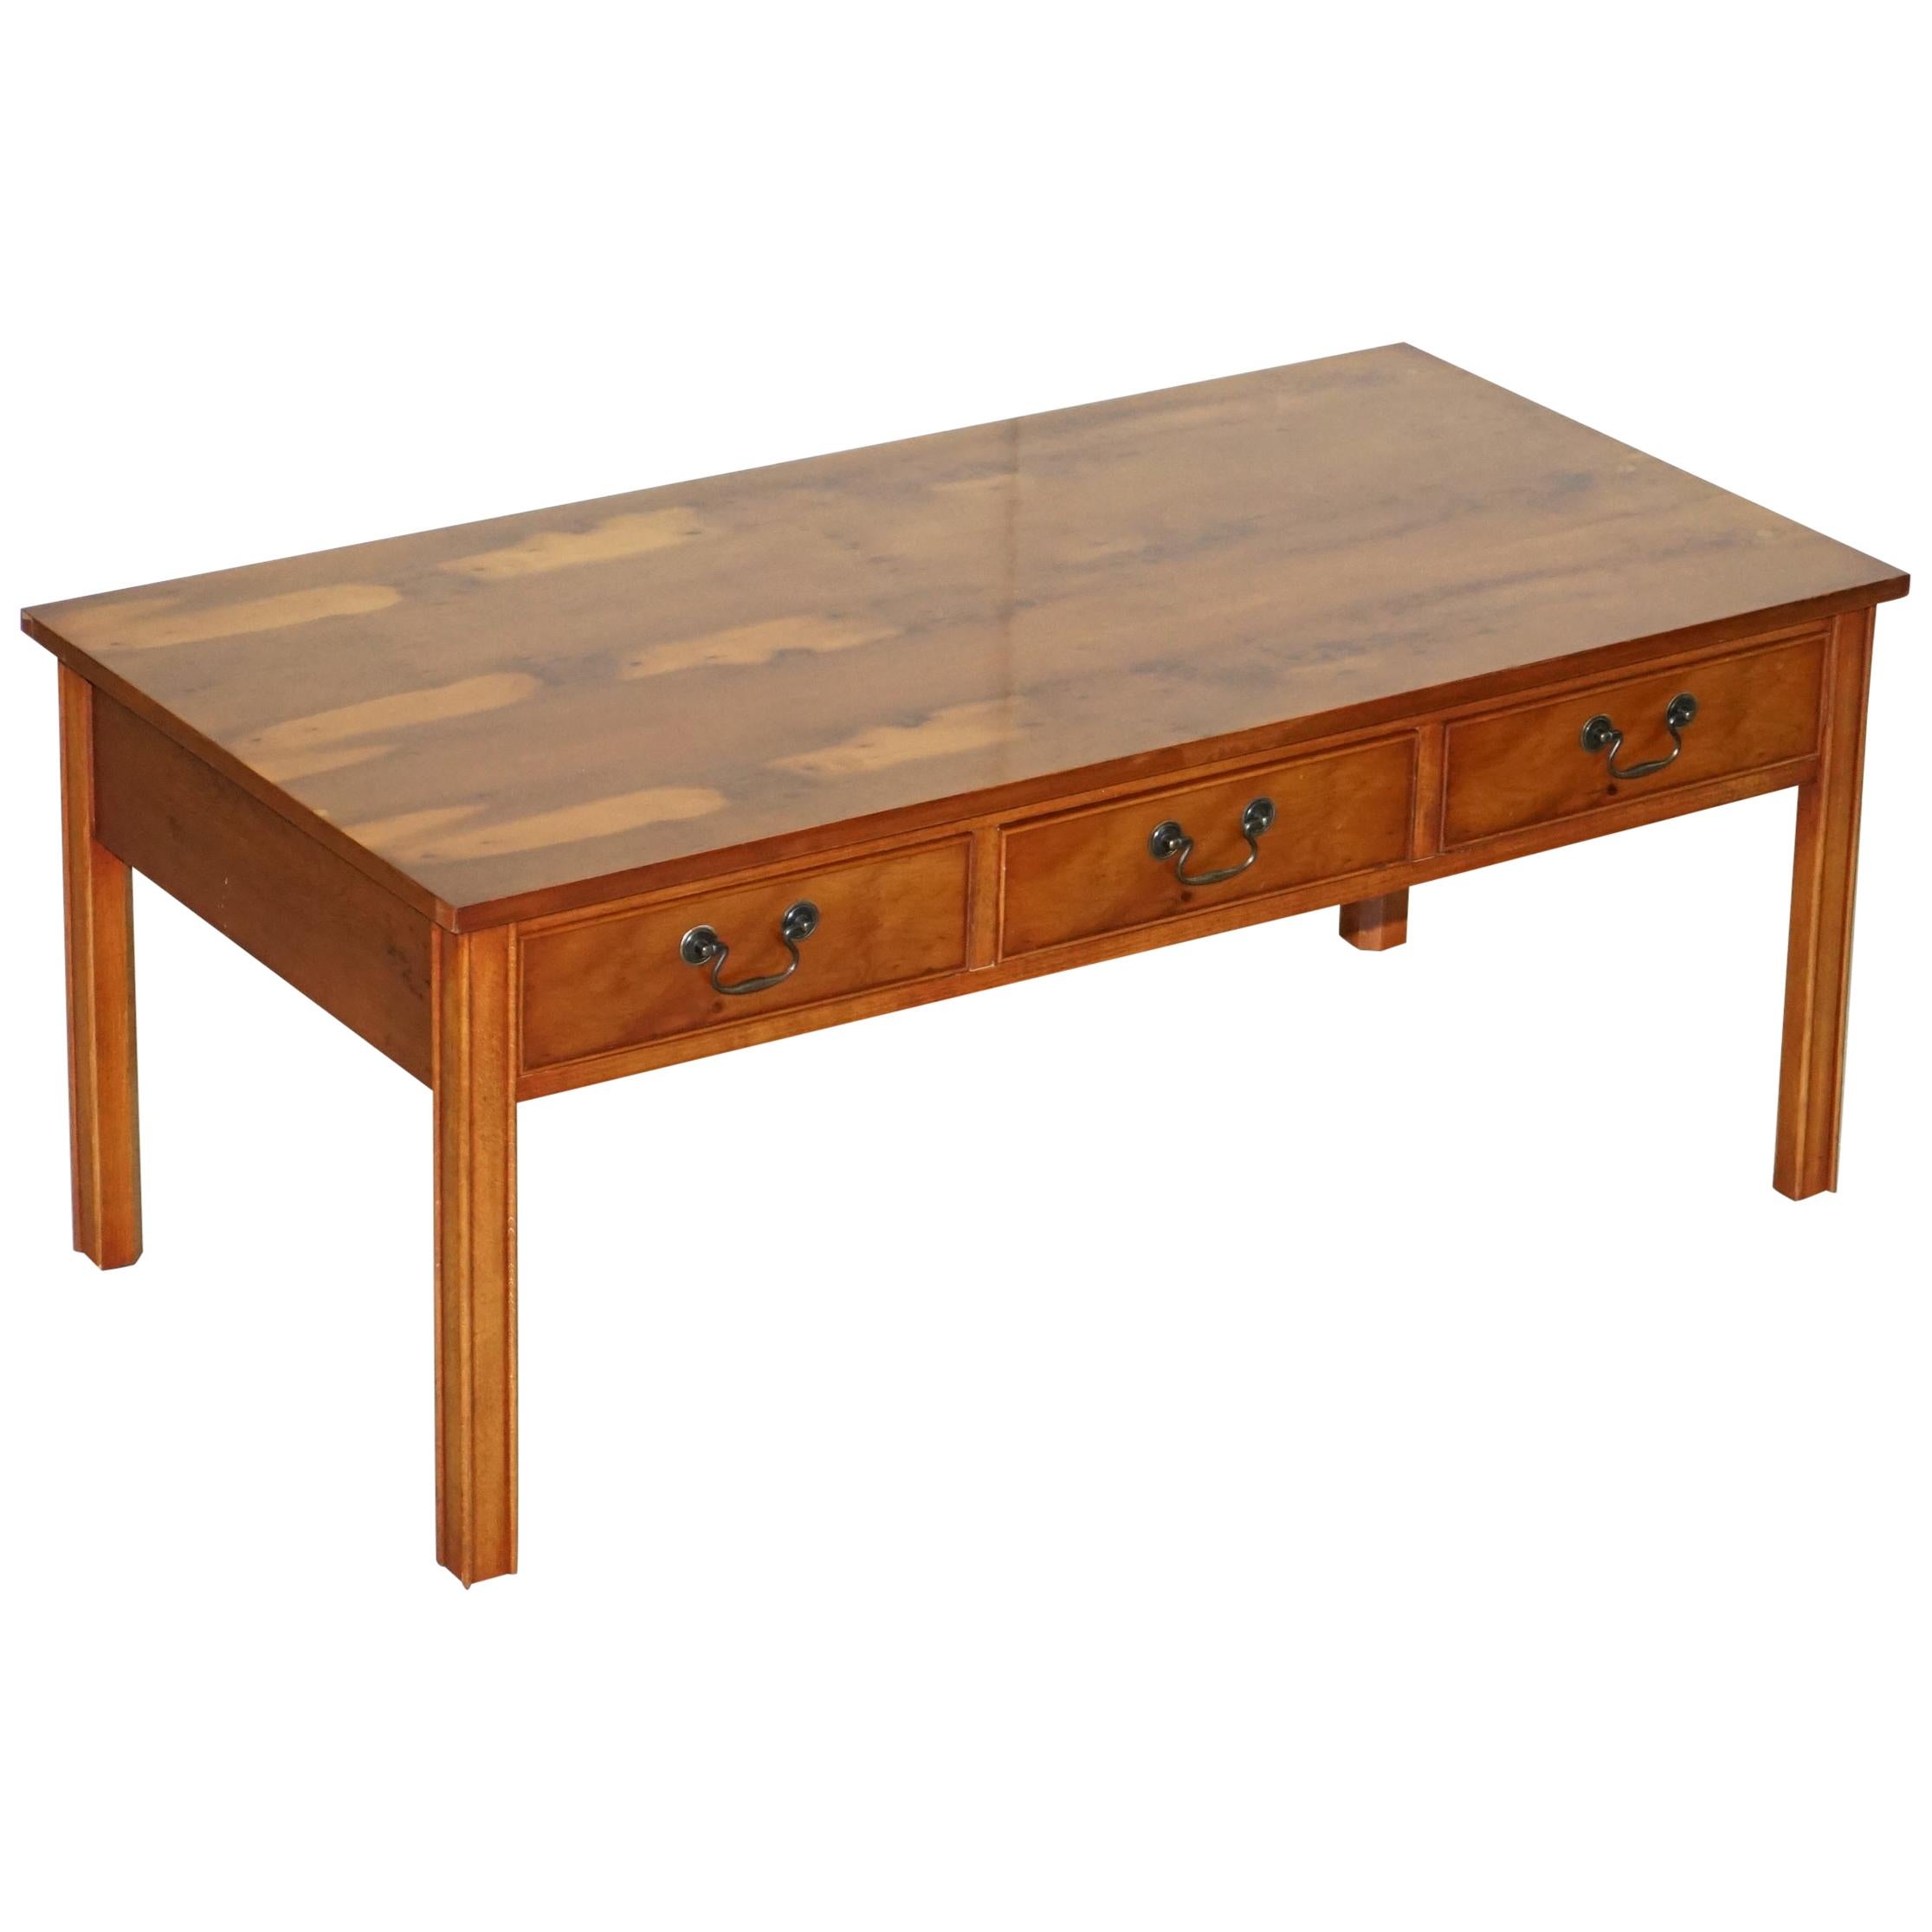 Lovely Harrods London Burr Yew Wood Coffee Table Lovely Vintage Detailing